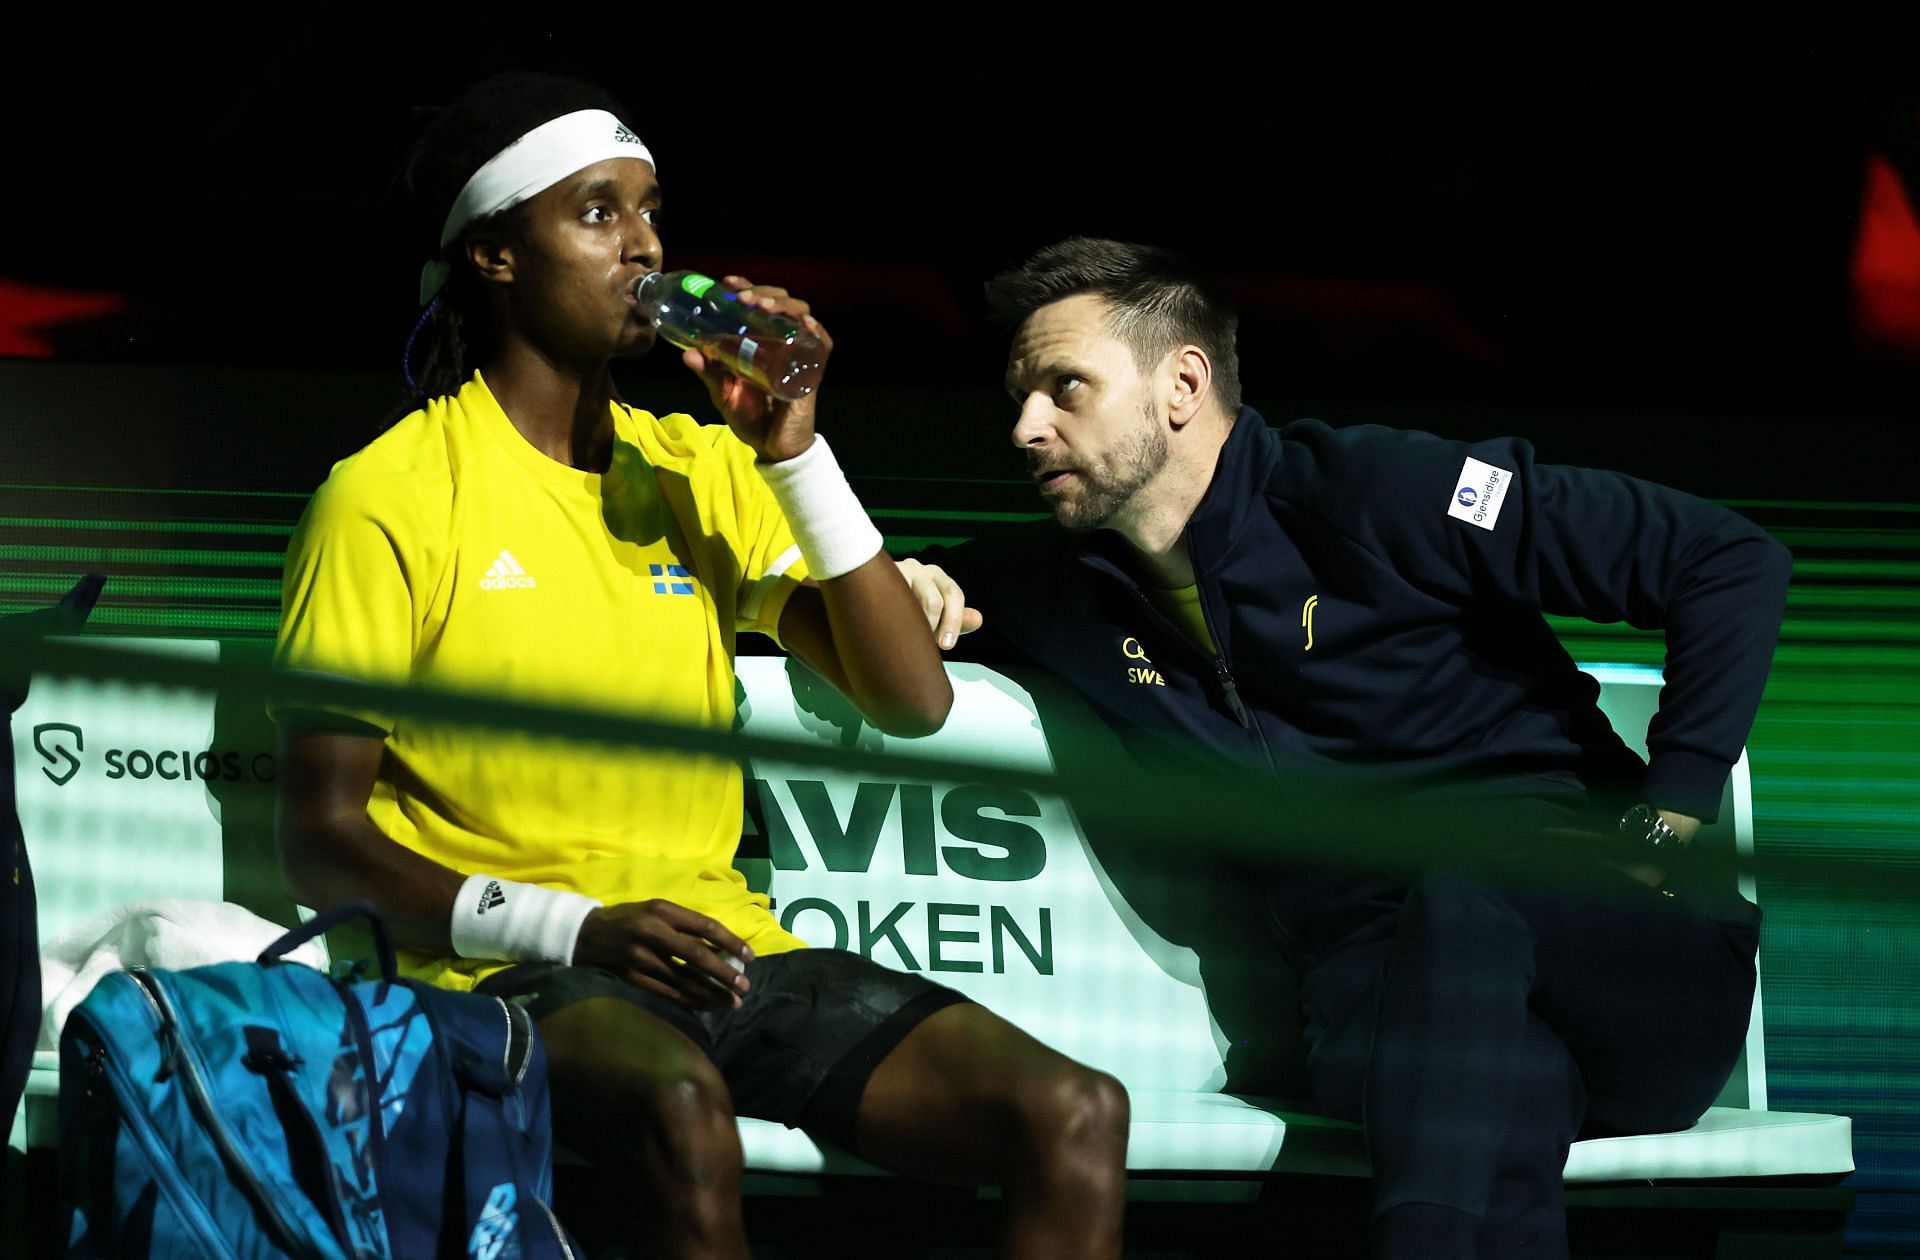 Robin Soderling captained the Swesish Davis Cup team in 2021